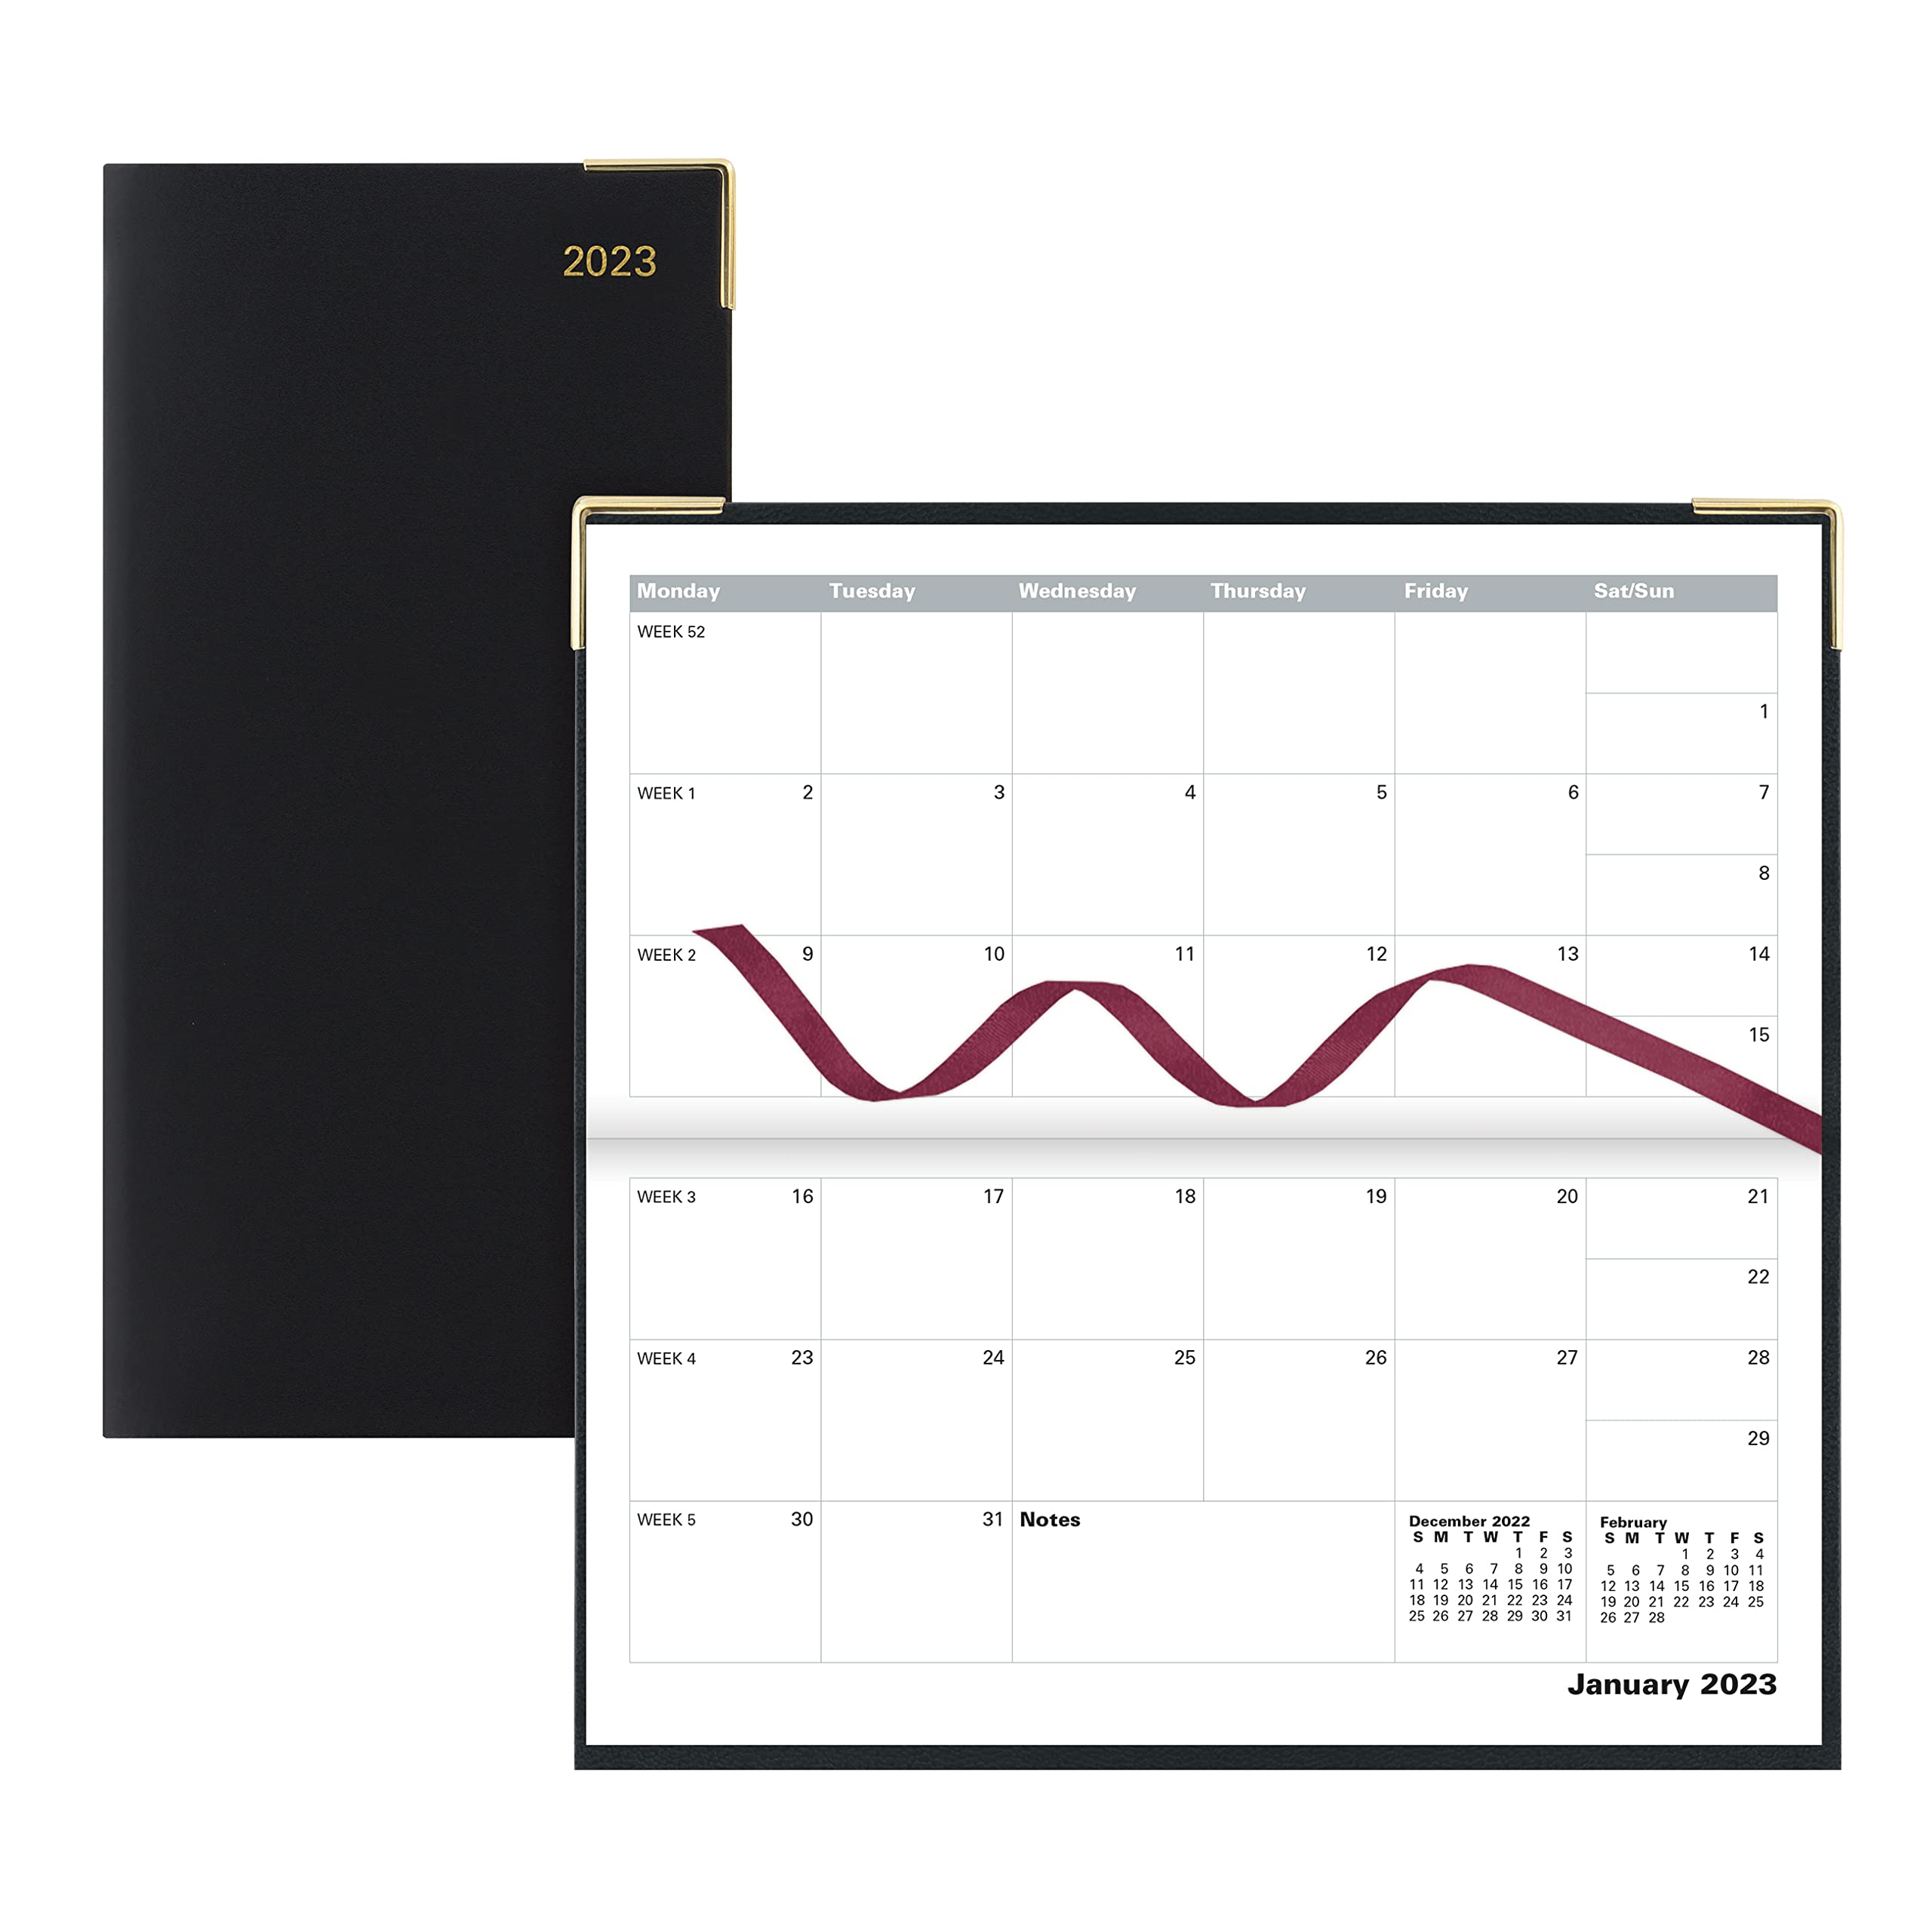 Letts Roma Monthly Planner, Slim Size, 13 Months, January 2023 to January 2024, Month-to-View, Horizontal, Gold Corners, 6.625" x 3.25", Black (C13SBK-23)